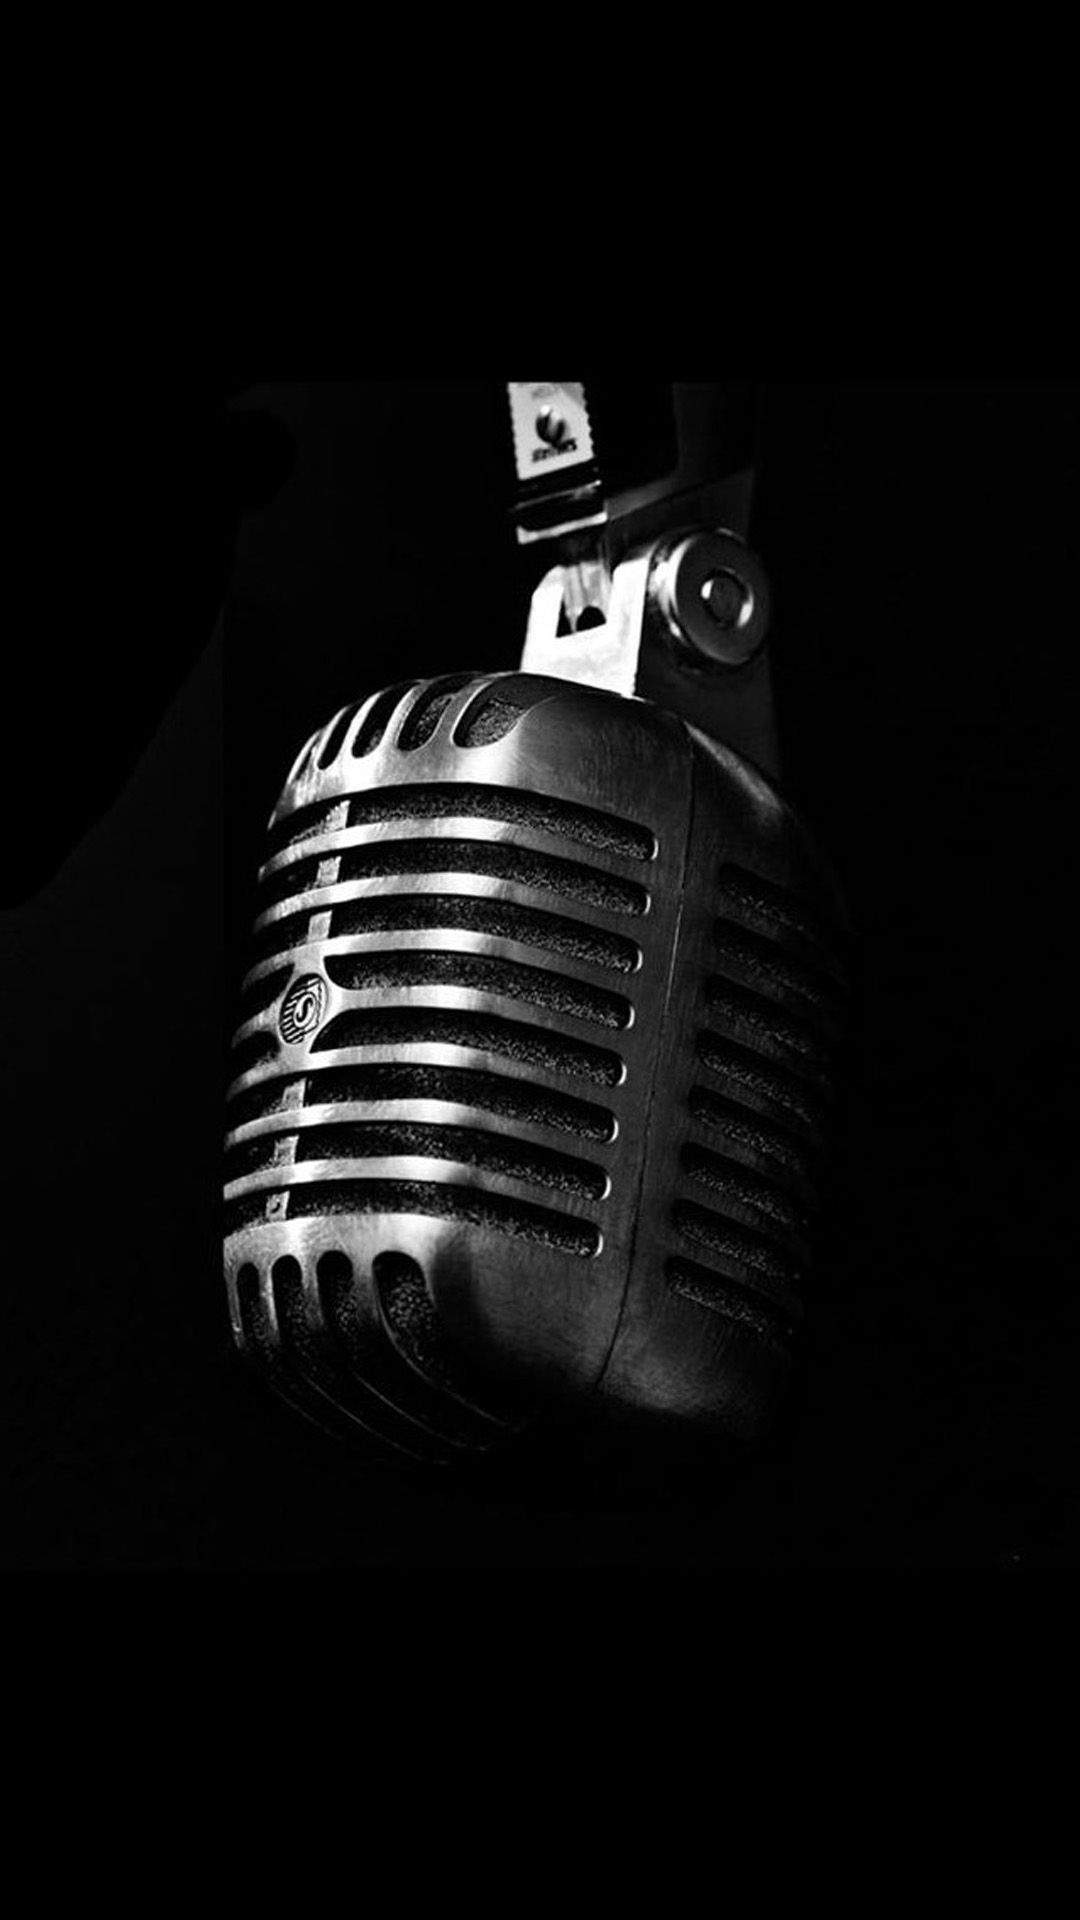 Karaoke: An instrument capable of transmitting sound, Music, Black and white. 1080x1920 Full HD Background.